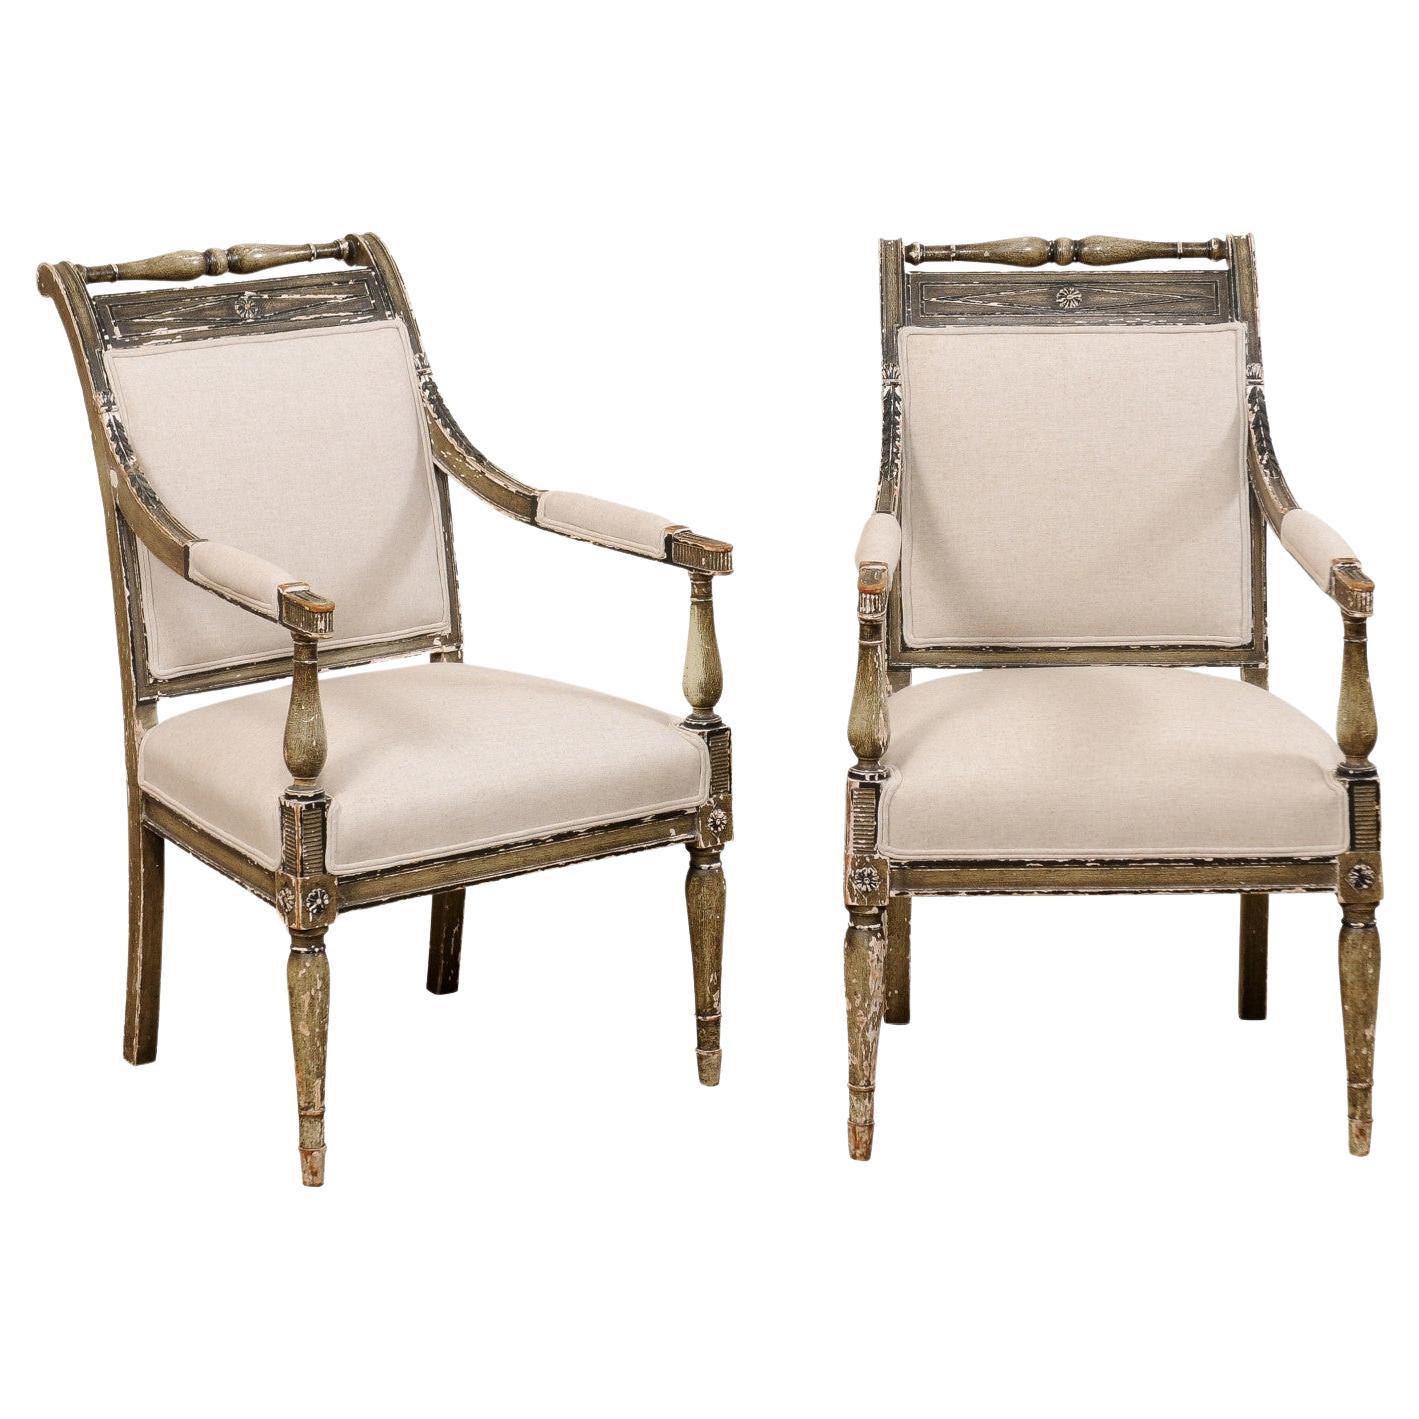 French Pair 19th C. Empire Style Fauteuils, Newly Upholstered in Belgian Linen